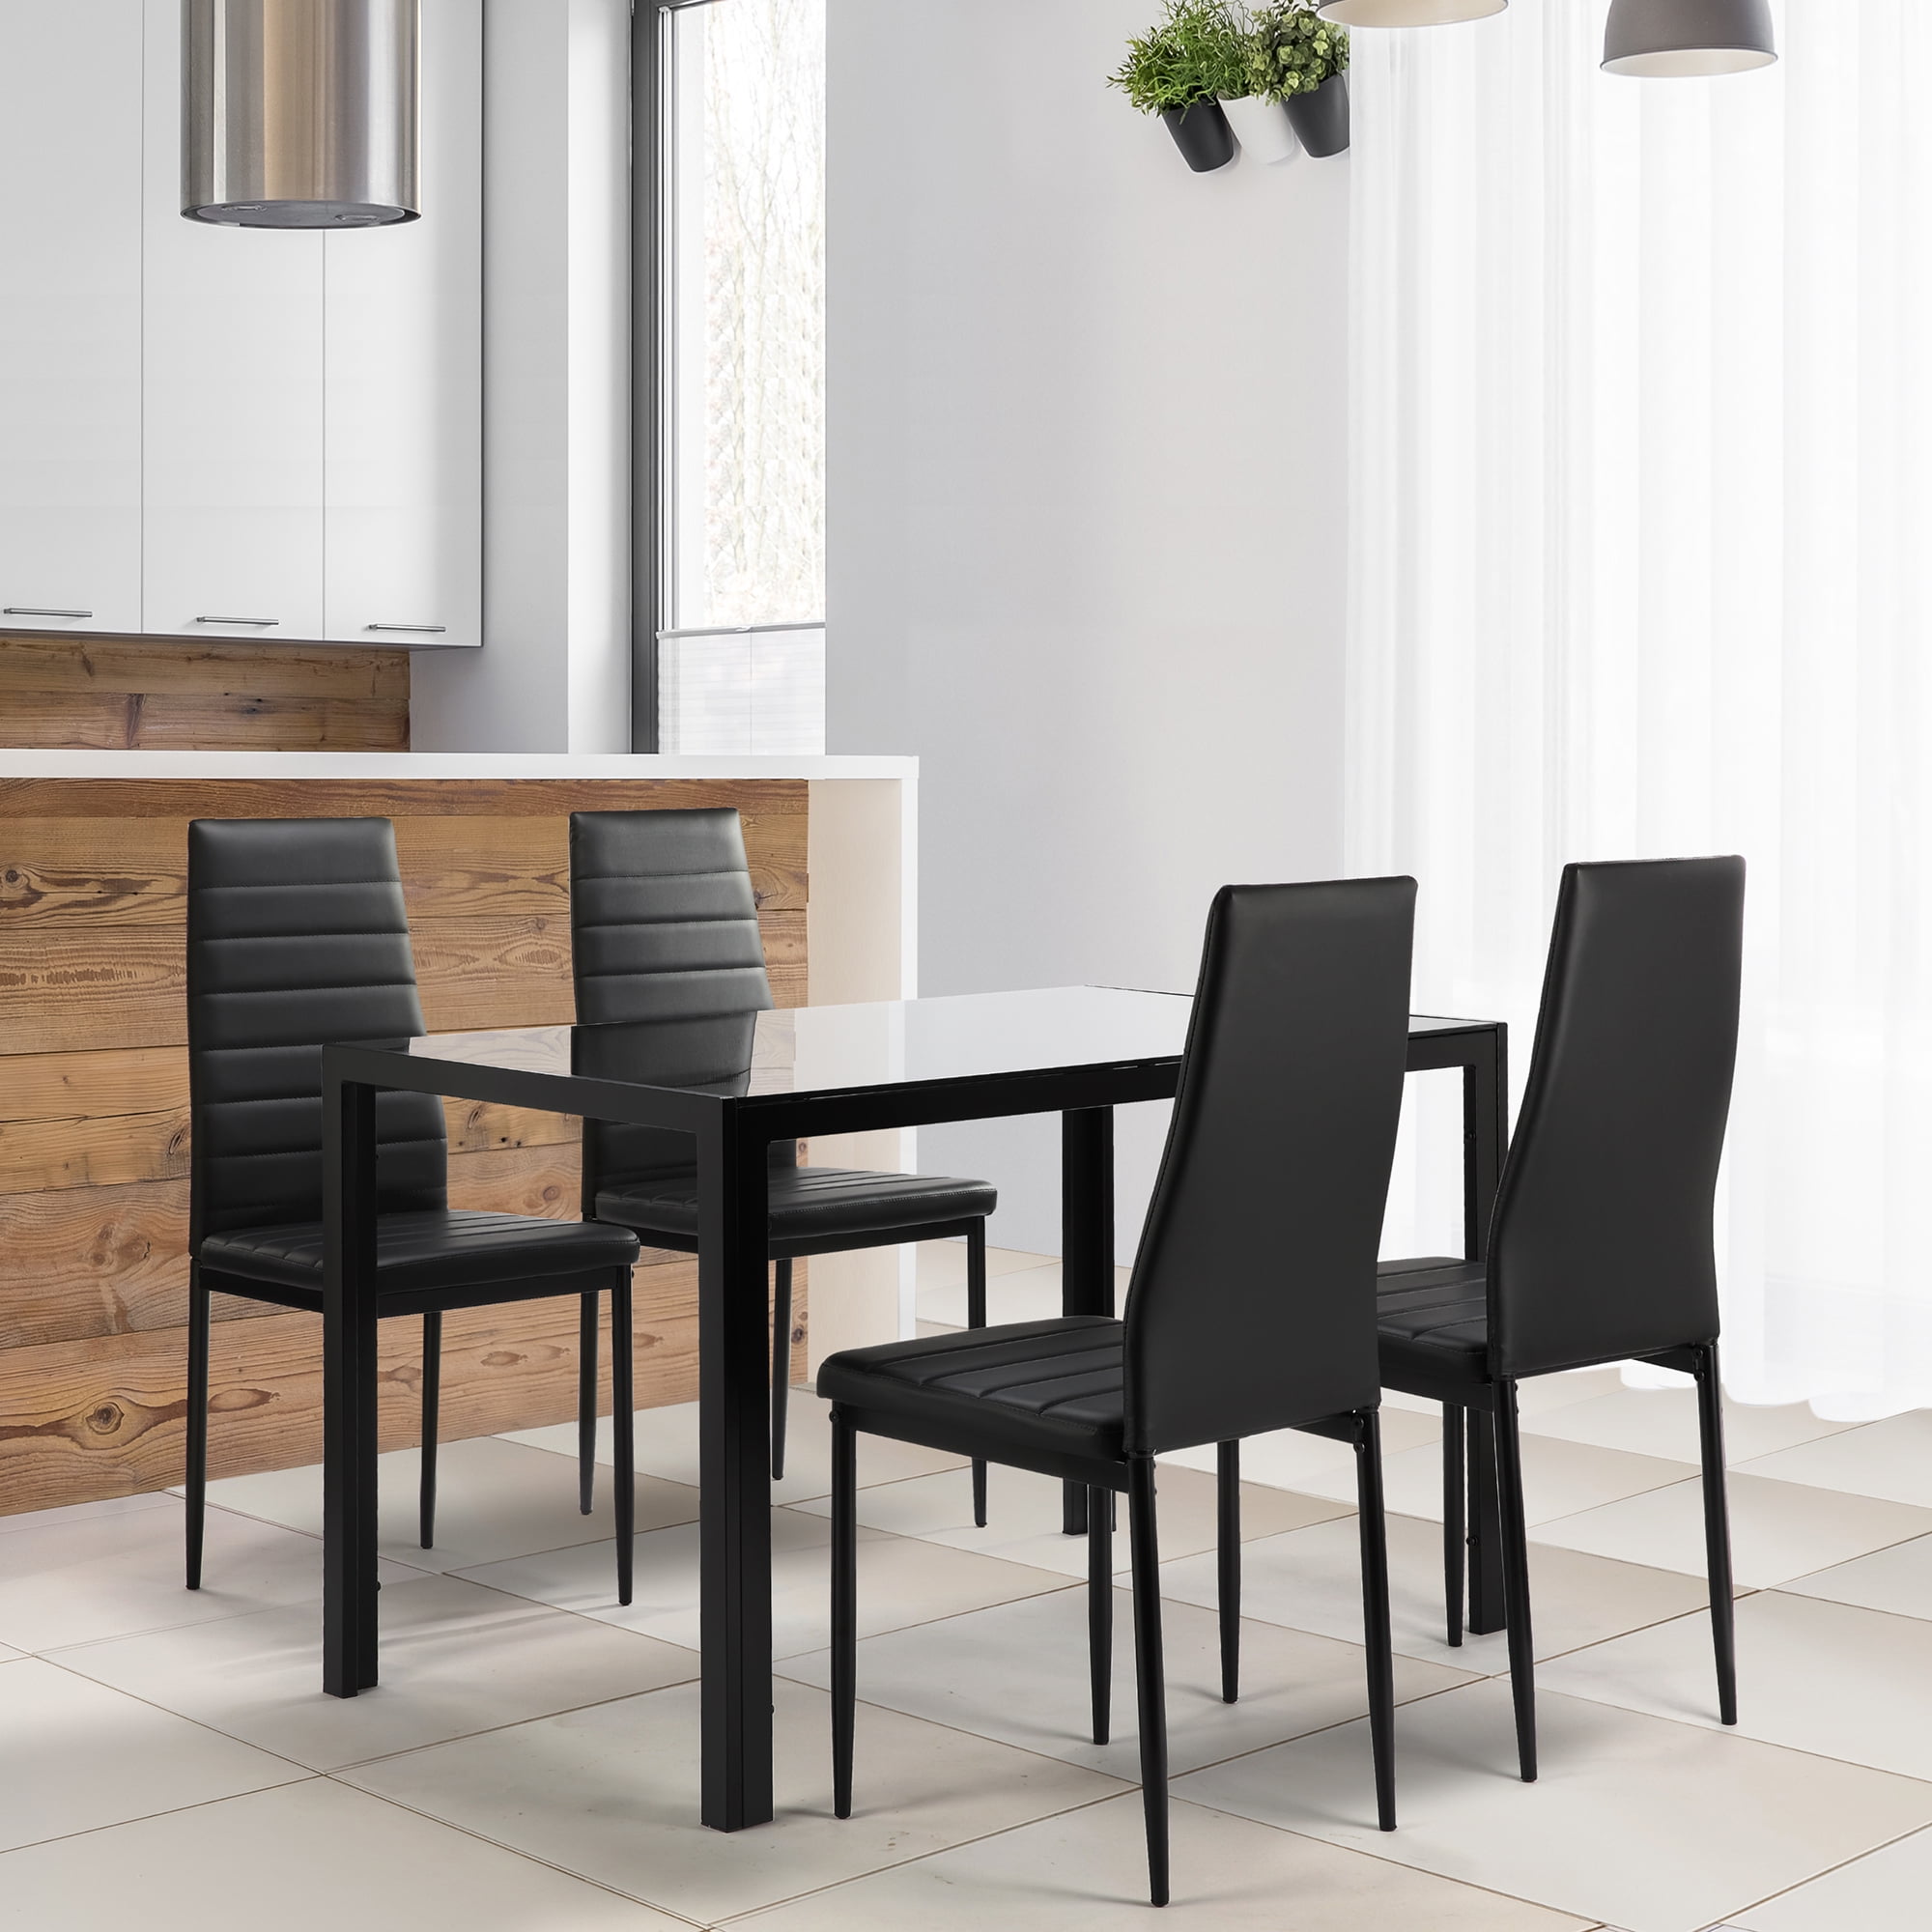 Modern Glass Dinner Table With Dining, Glass Dining Table Set With 4 Black Chairs